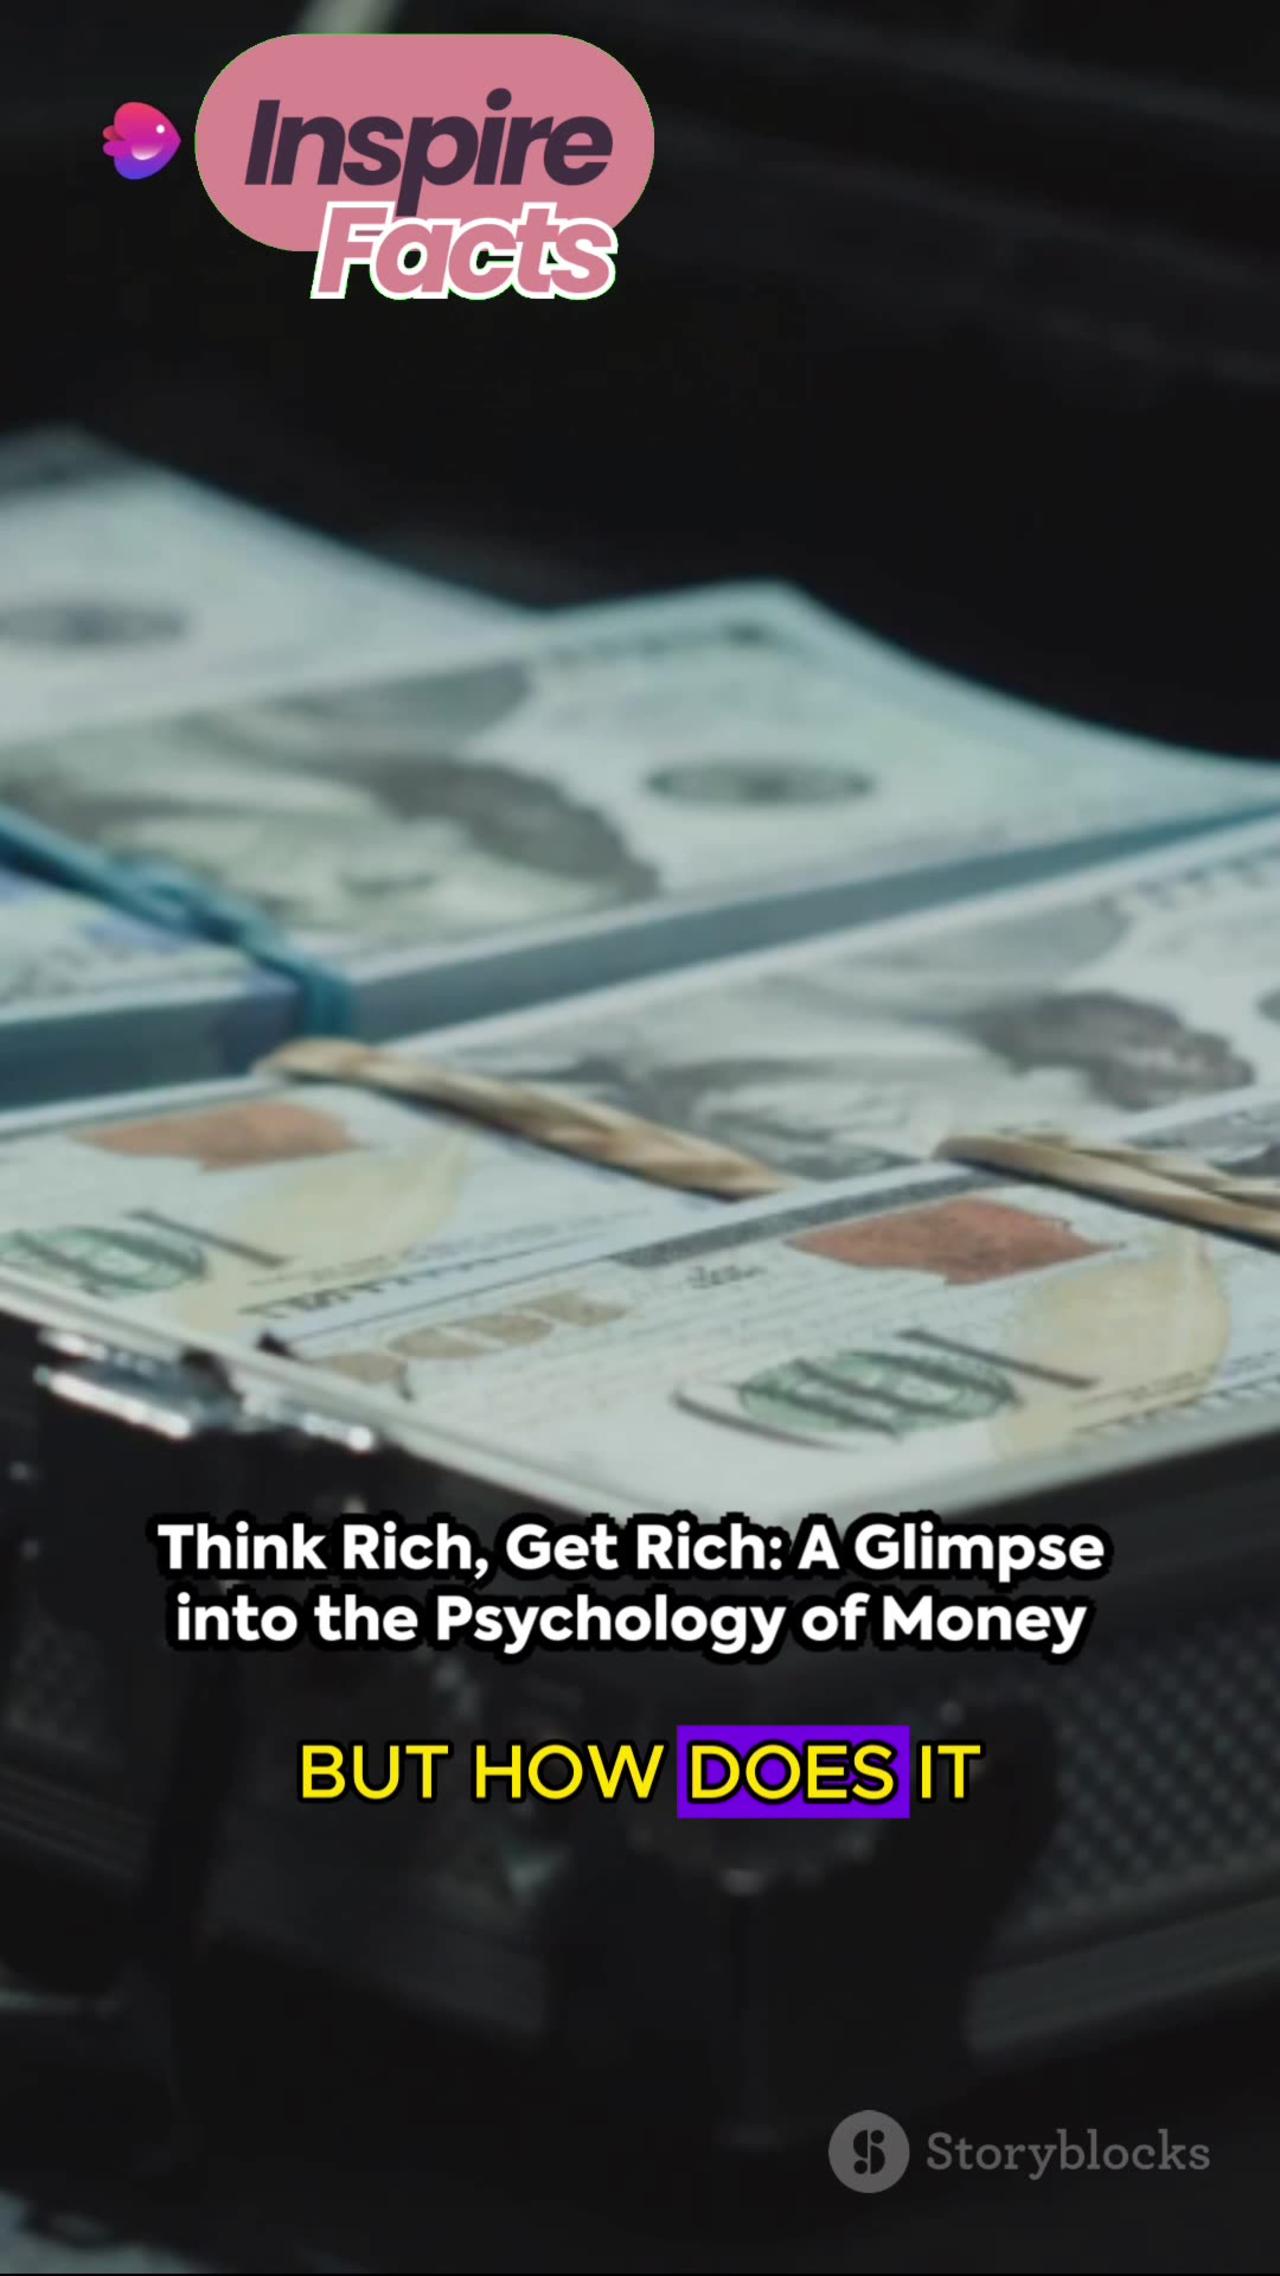 Think Rich, Get Rich: A Glimpse into the Psychology of Money #motivation #onlinebusiness #youtubetip